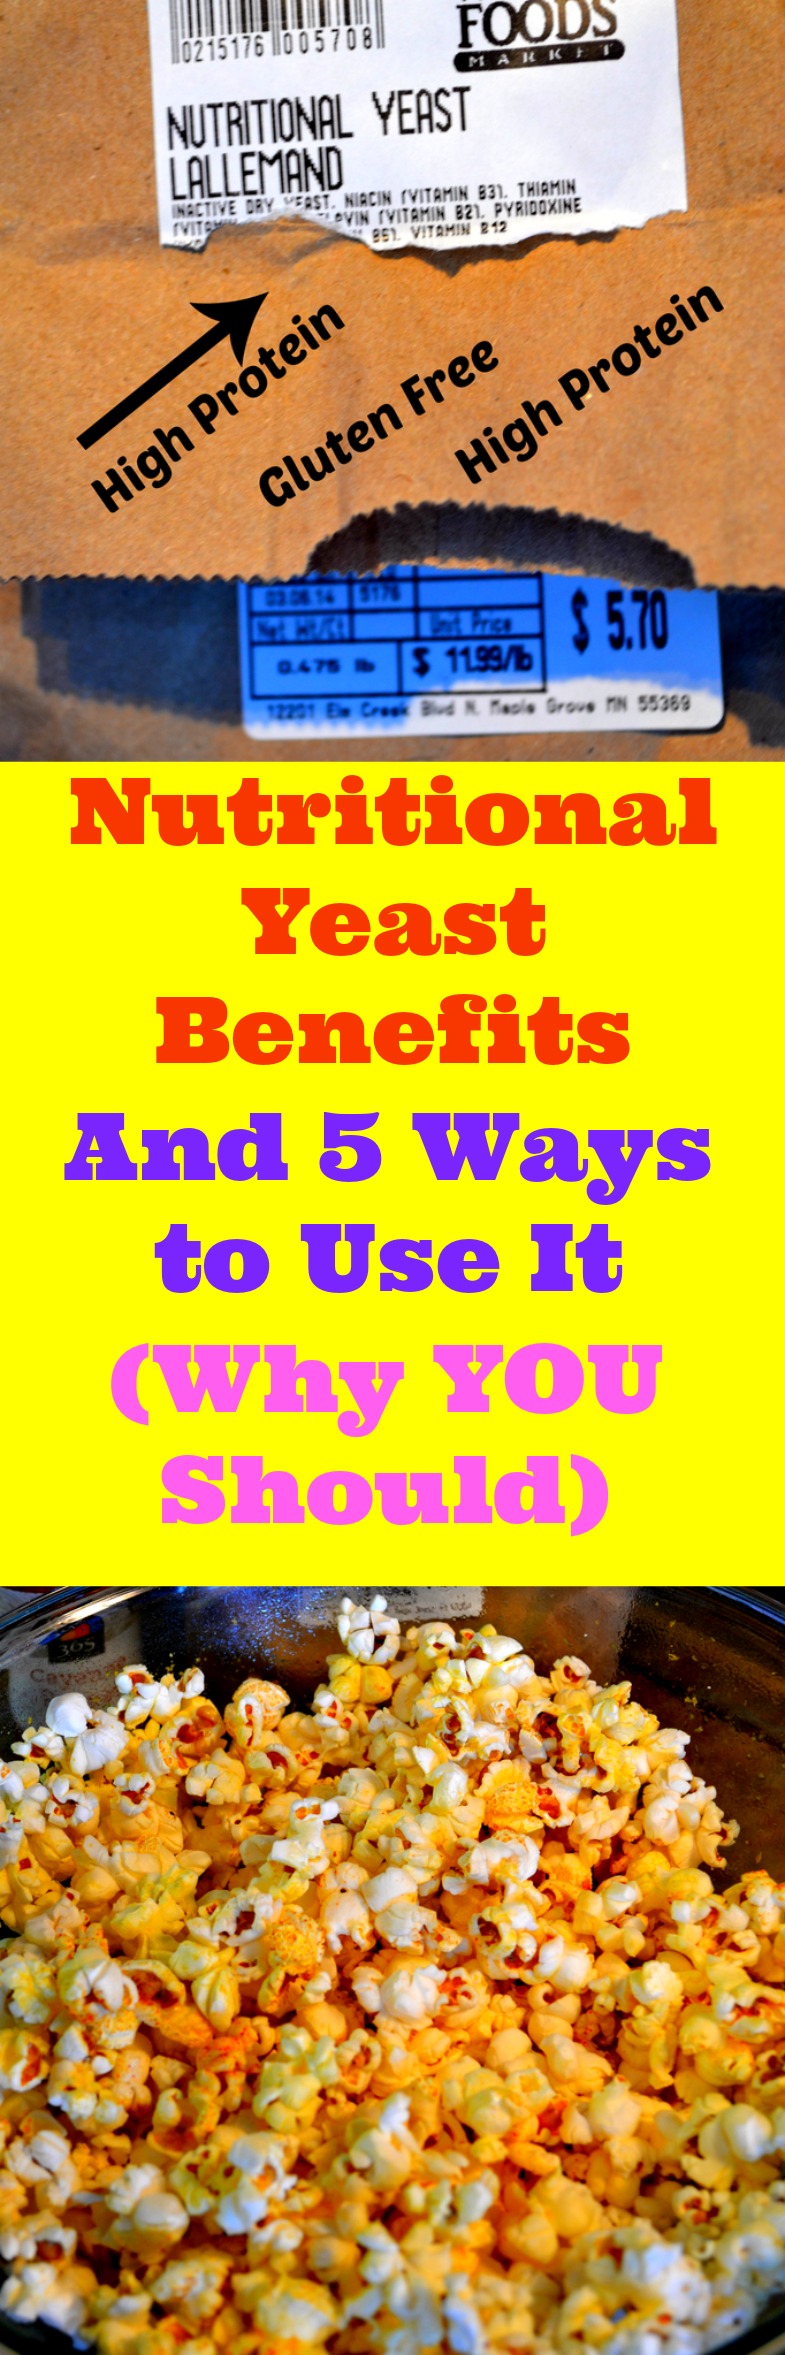 You must learn about Nutritional Yeast Benefits and what it can do for your health. Nutritional Yeast can replace Parmesan cheese in a pinch and tastes very similar. Surprisingly high in protein with unexpected flavors. Certified Gluten-Free and now sold in most markets. Tastes great on popcorn, pizza, cauliflower, added into soup, is Vegan and vertually calorie free, making it great for weight loss.